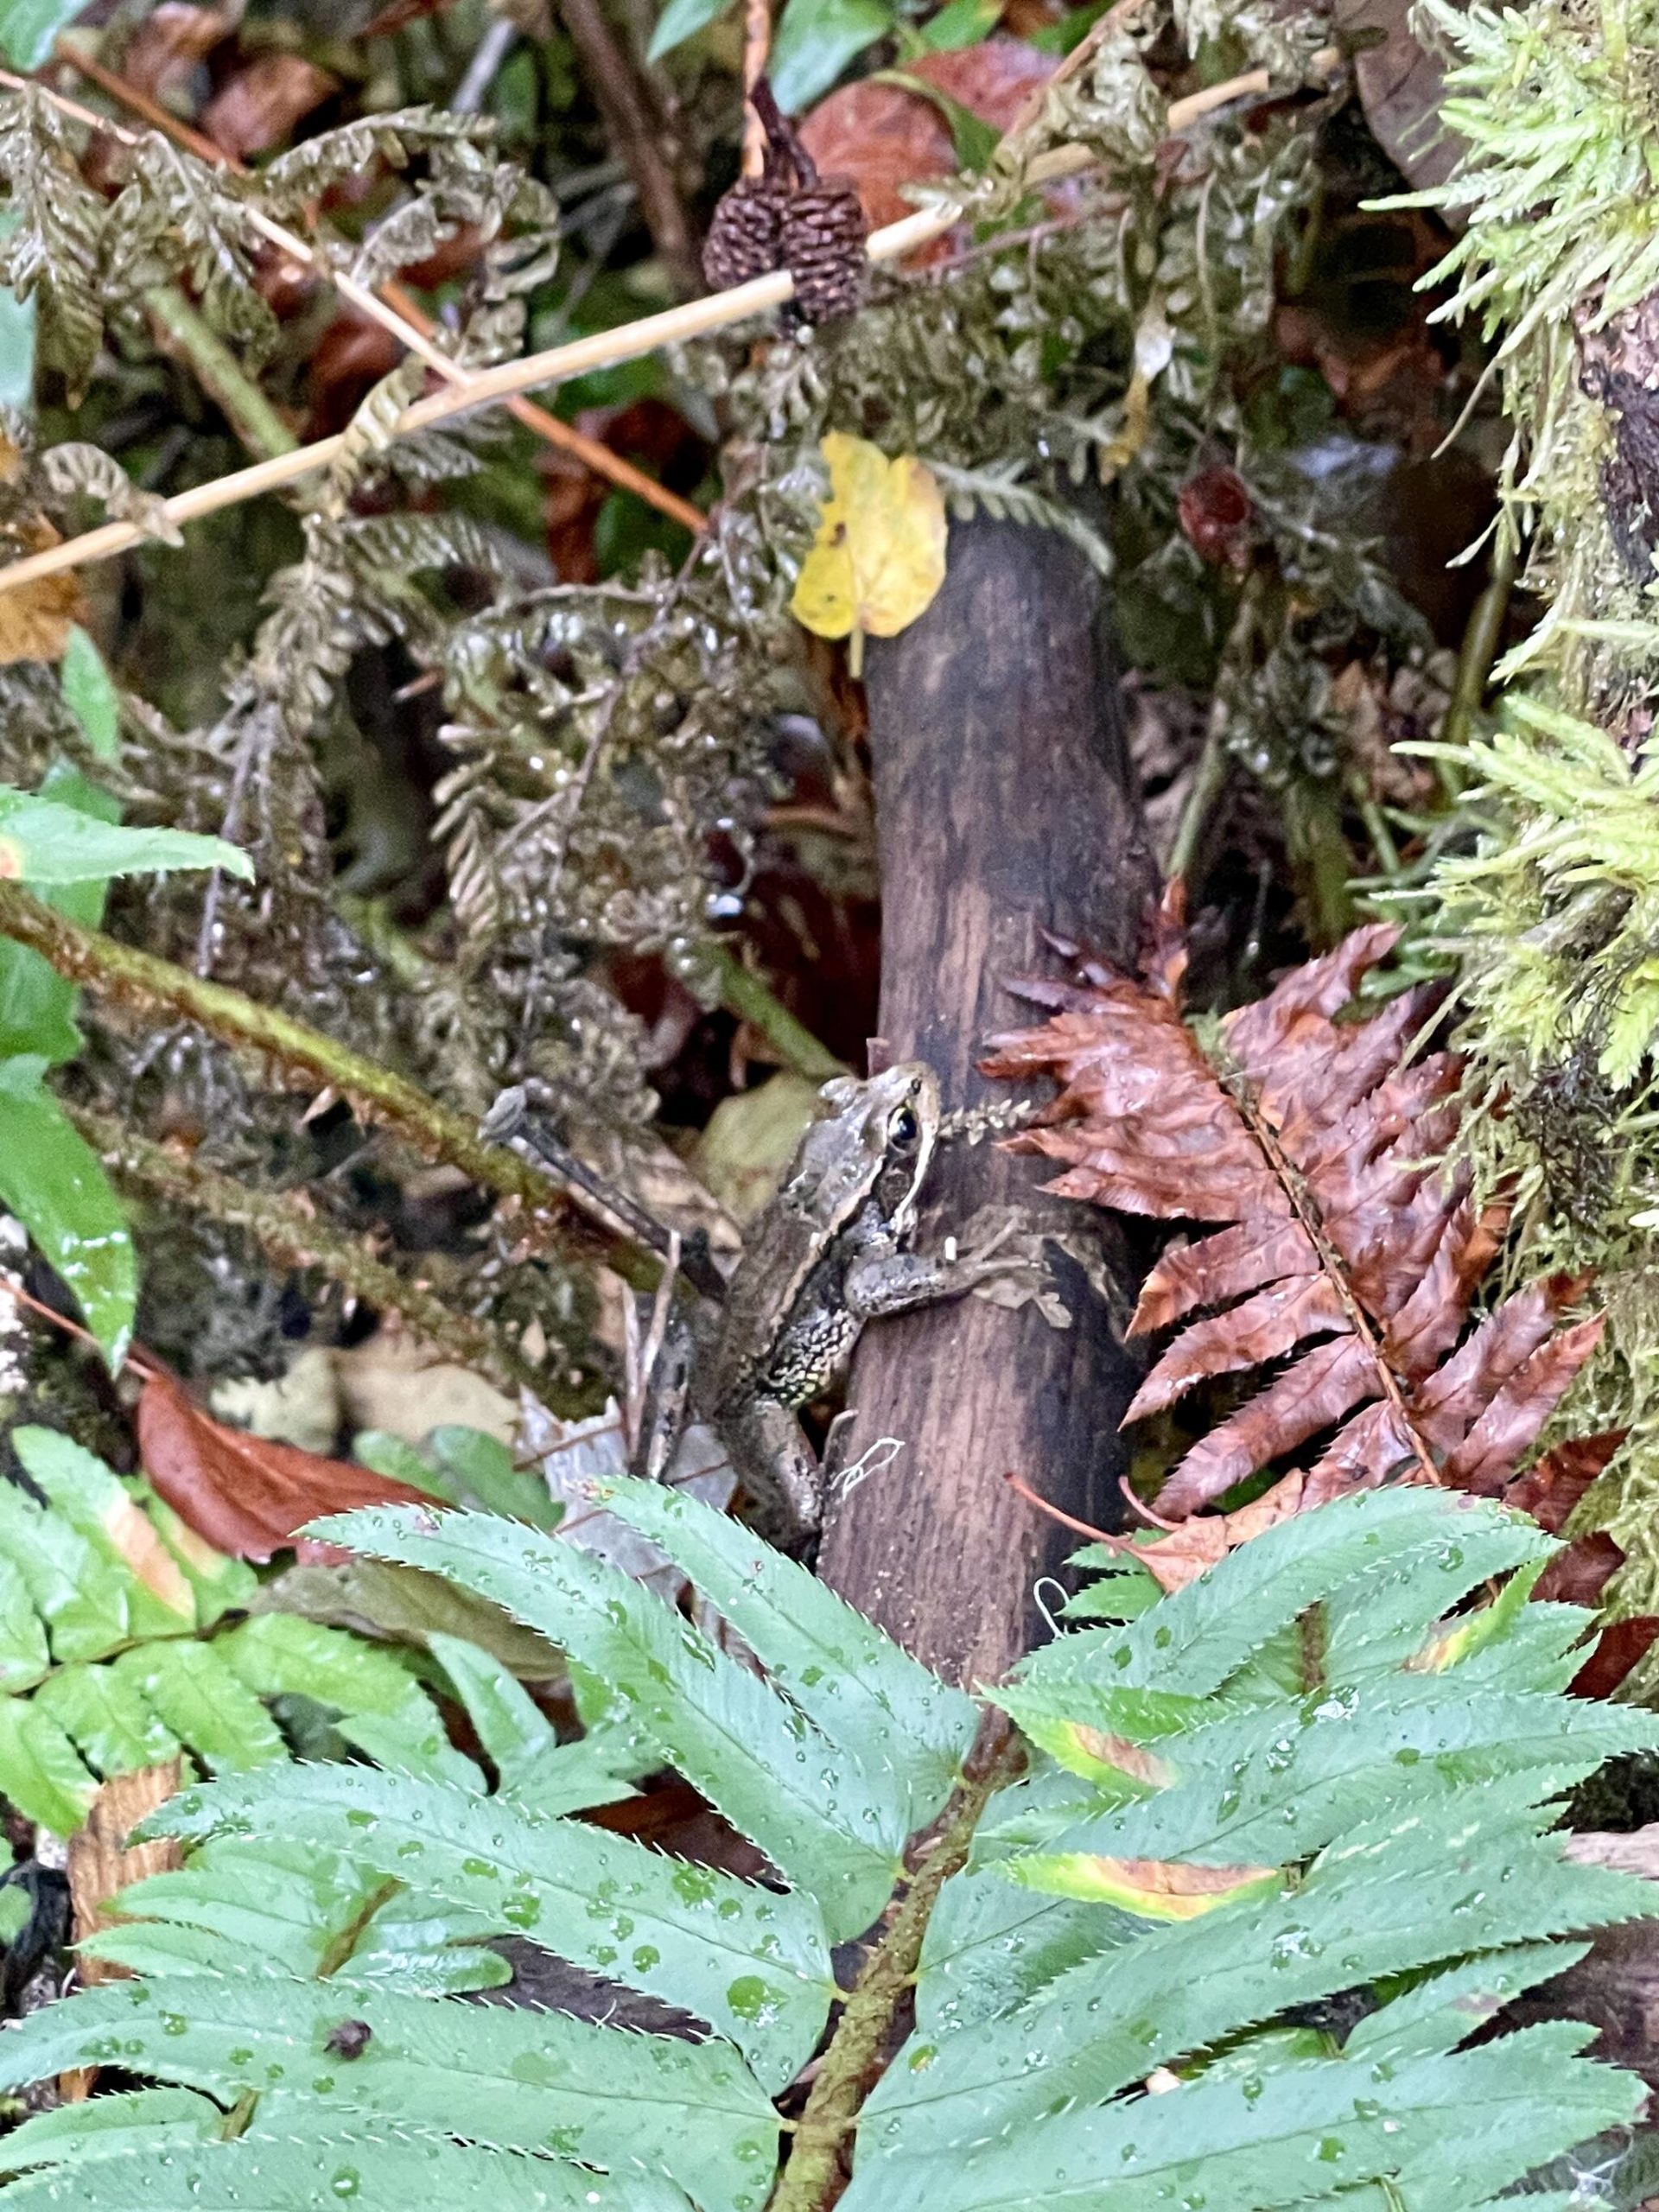 Michael S. Lockett / The Daily World 
A frog perches on a log in an orphaned wetland recently reconnected with the Hoquiam River to restore natural tidelands.